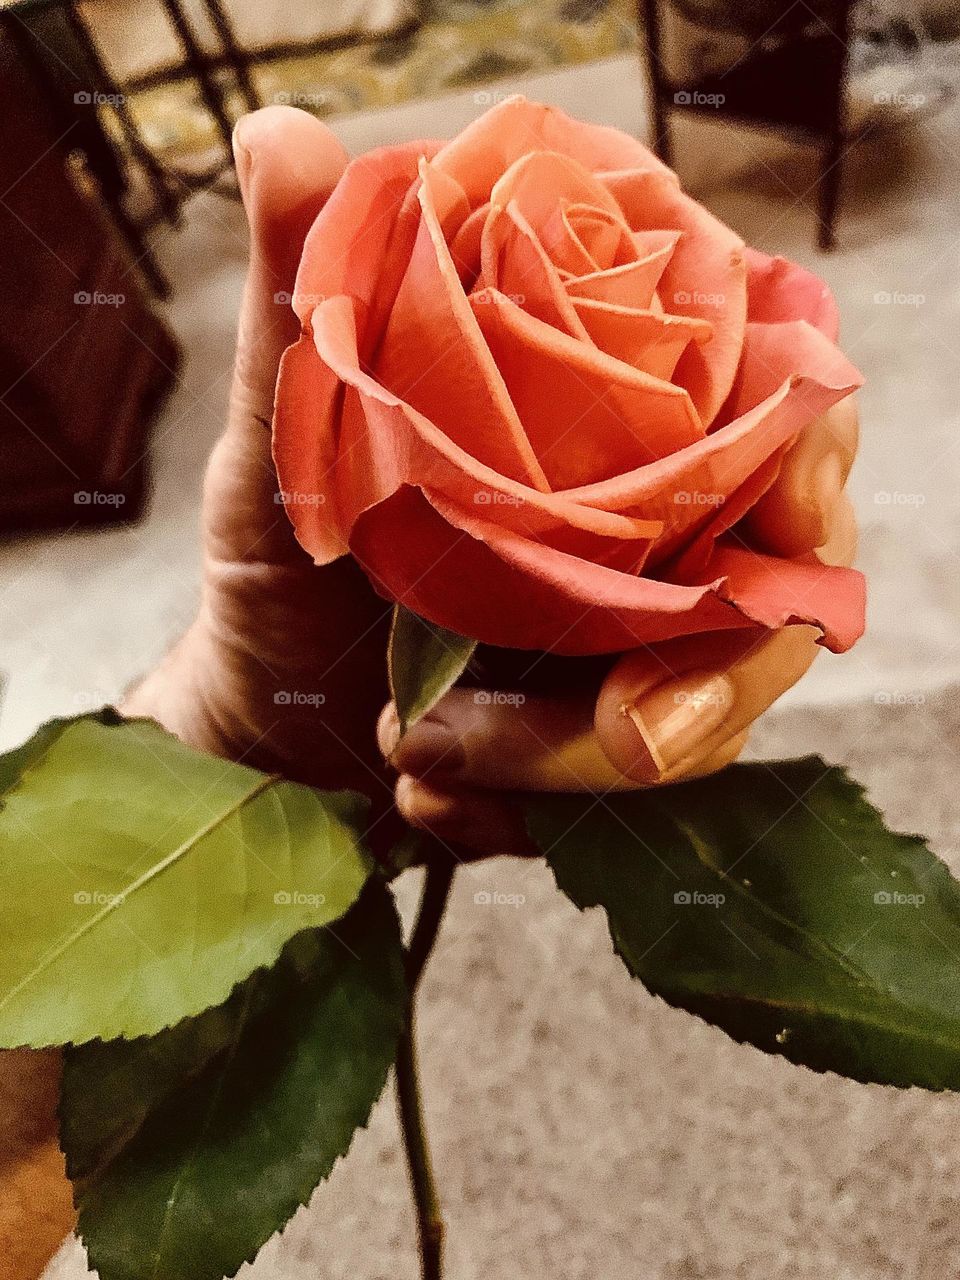 Rose in hand 